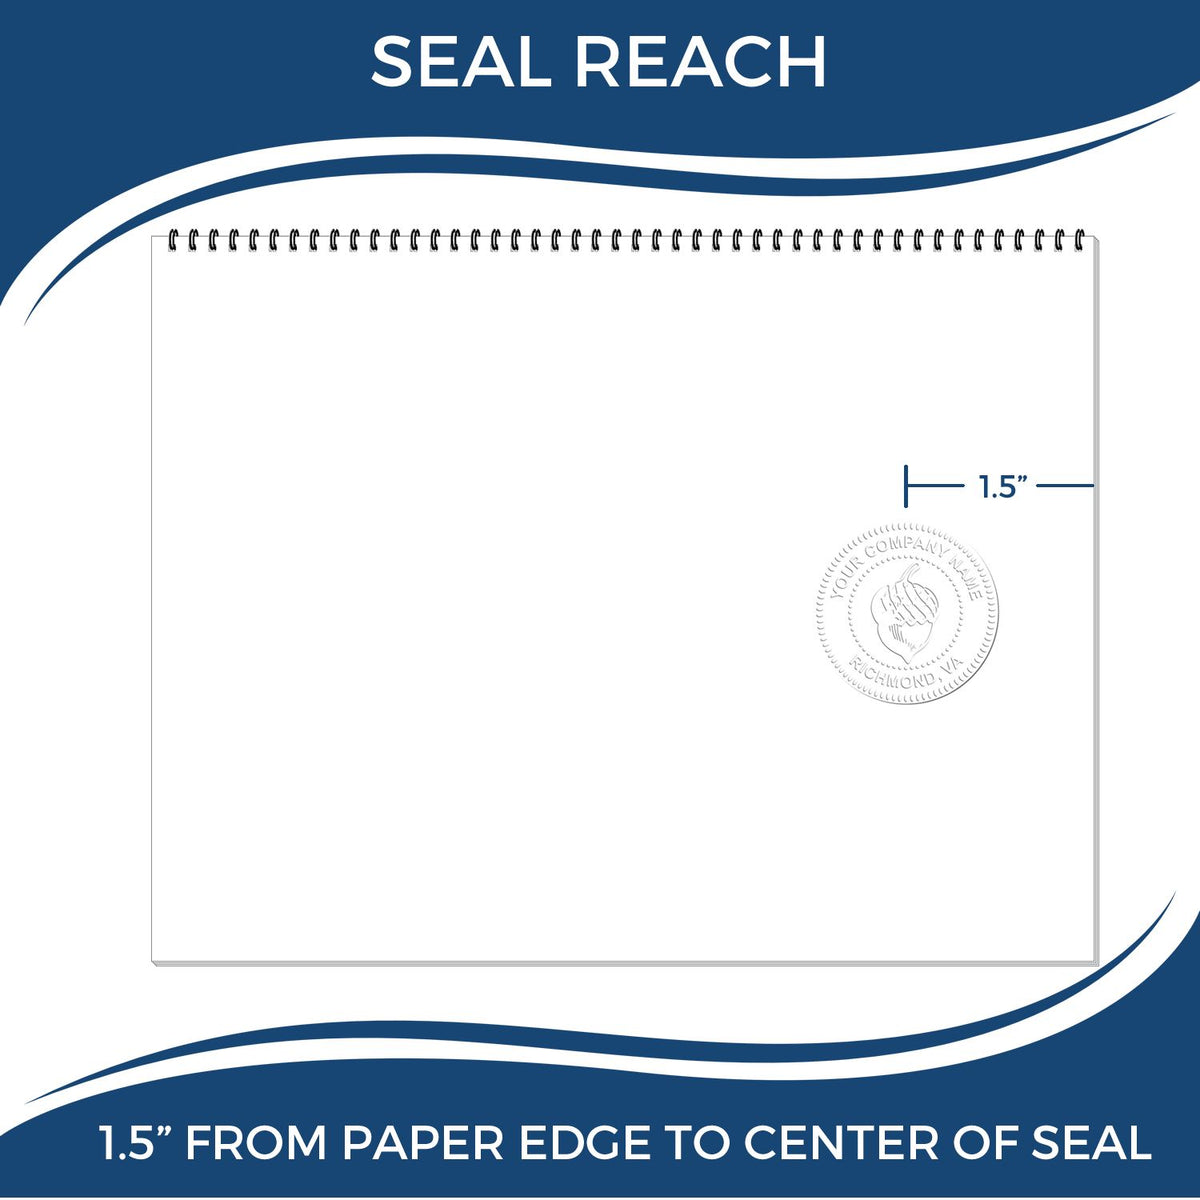 An infographic showing the seal reach which is represented by a ruler and a miniature seal image of the Hybrid West Virginia Architect Seal